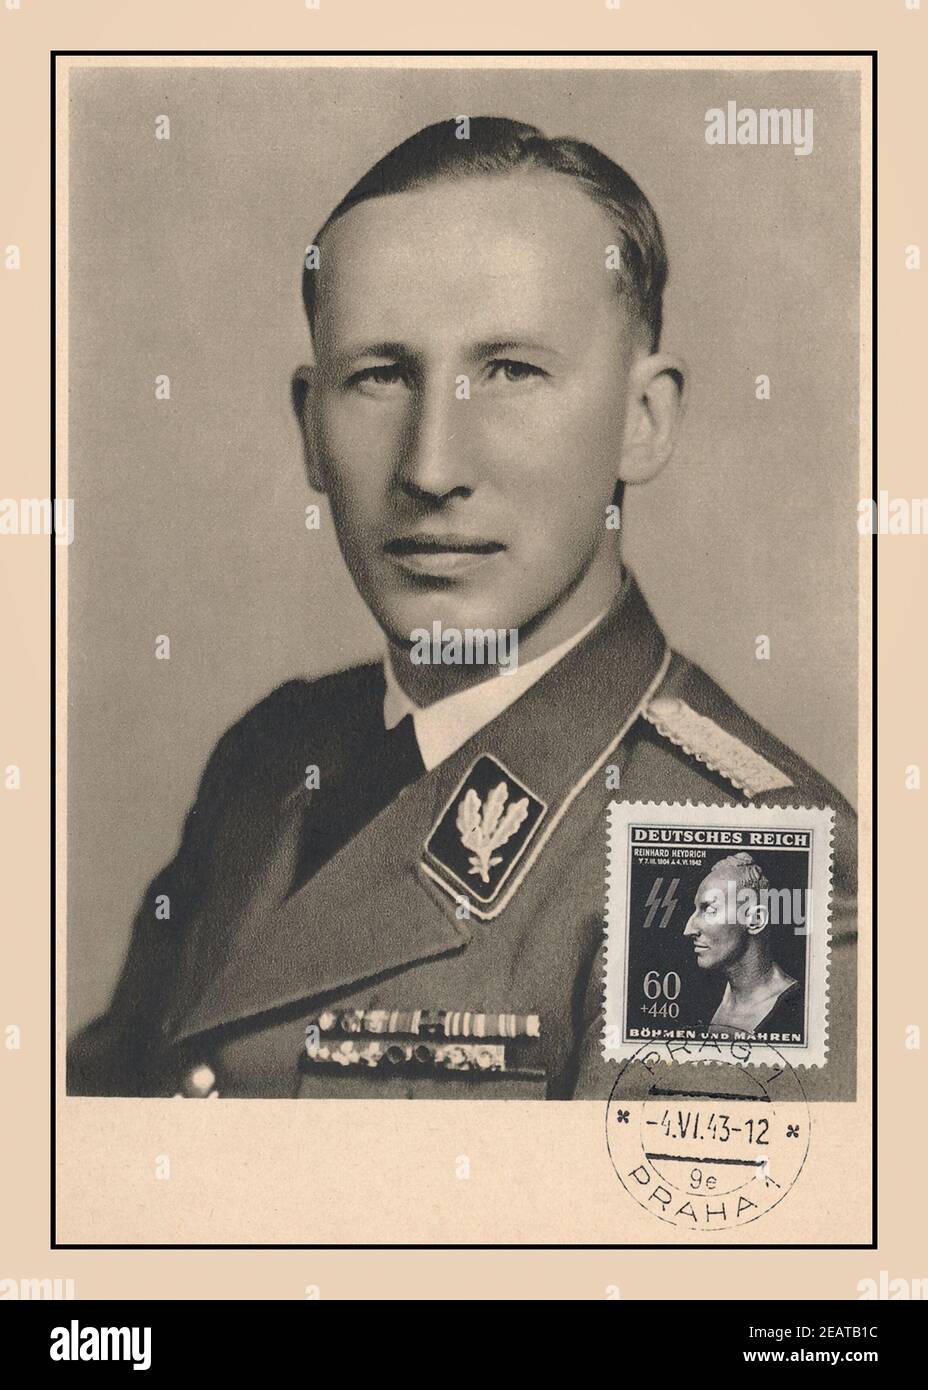 HEYDRICH 1943, WW2 portrait of senior Nazi Waffen SS-Obergruppenführer  Reinhard Heydrich, a brutal fervent Nazi, responsible for countless war  crimes. A favourite of Adolf Hitler. Subsequent commemorative card with his death  mask